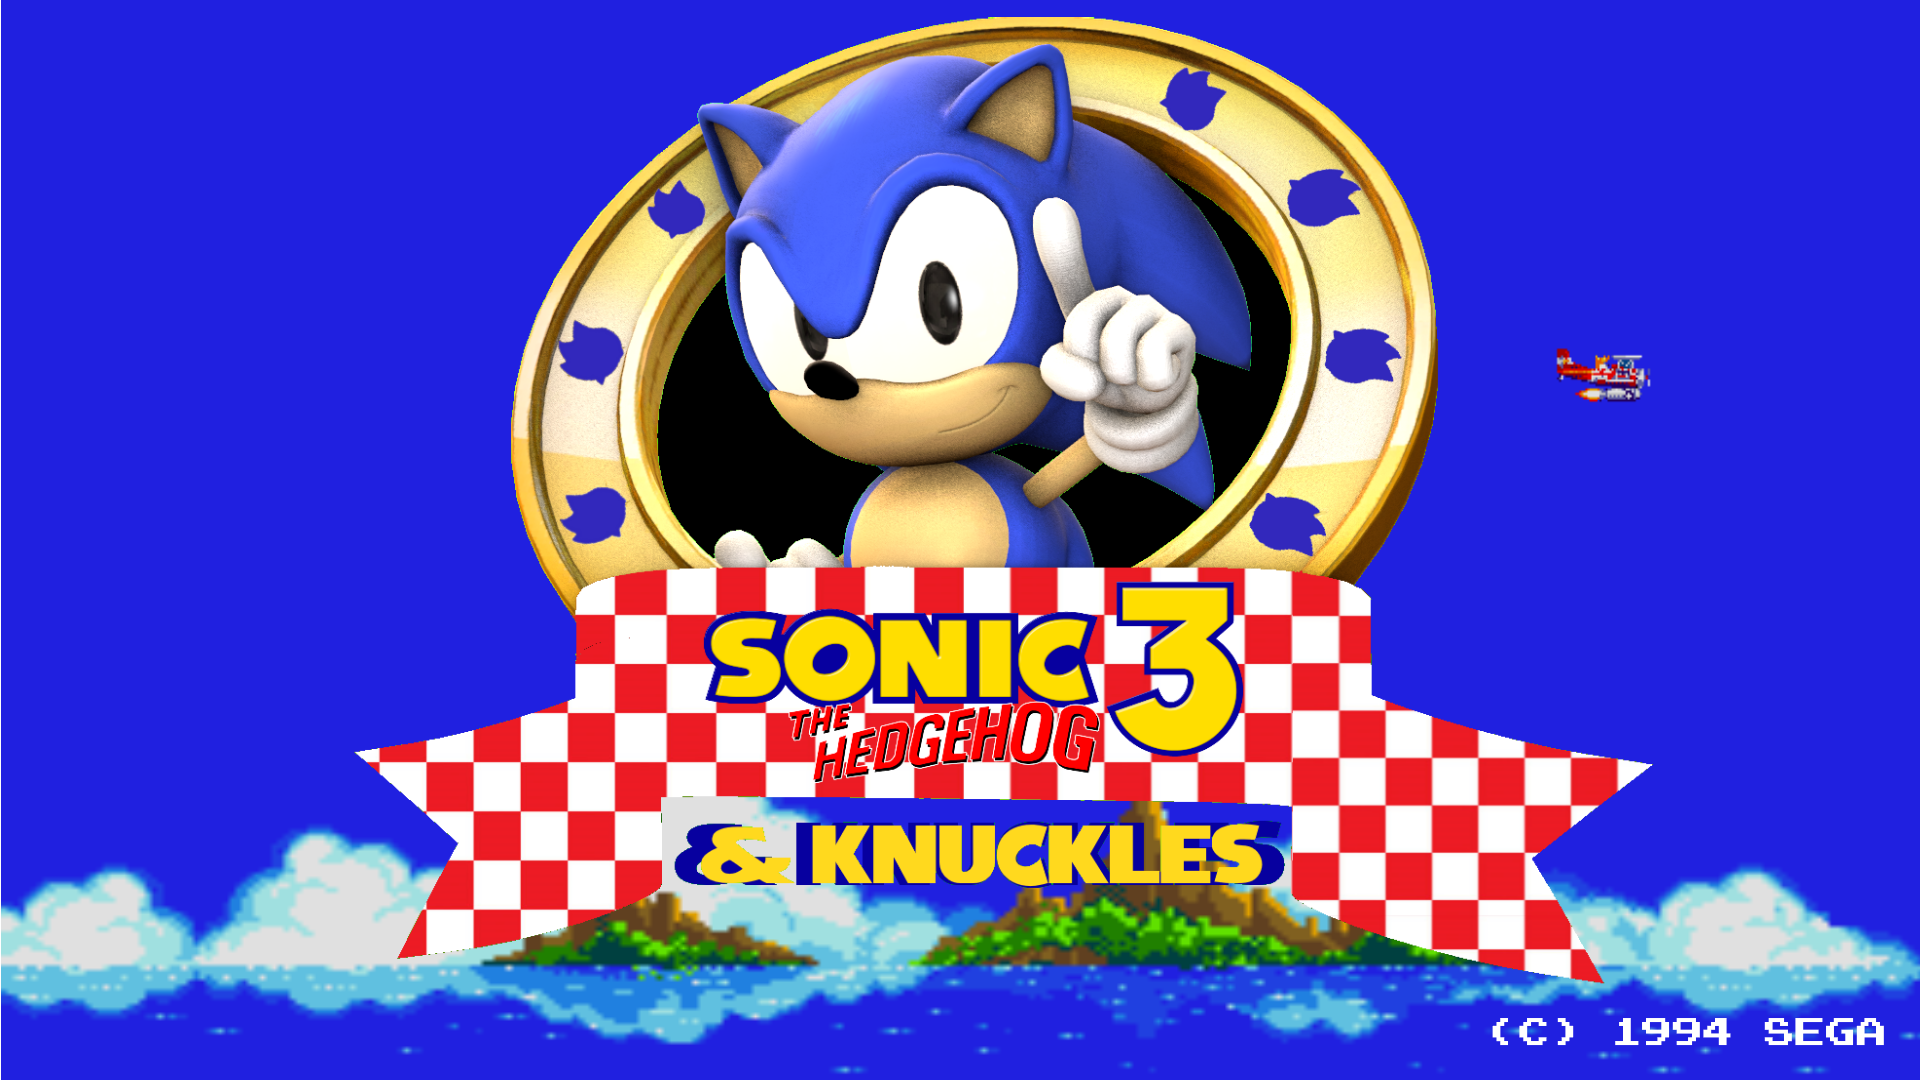 Sonic rom rus. Sonic 3 и НАКЛЗ. Sonic 3 & Knuckles Sega. Sonic the Hedgehog 3 and Knuckles. Sonic 3 and Knuckles русская версия Ром.